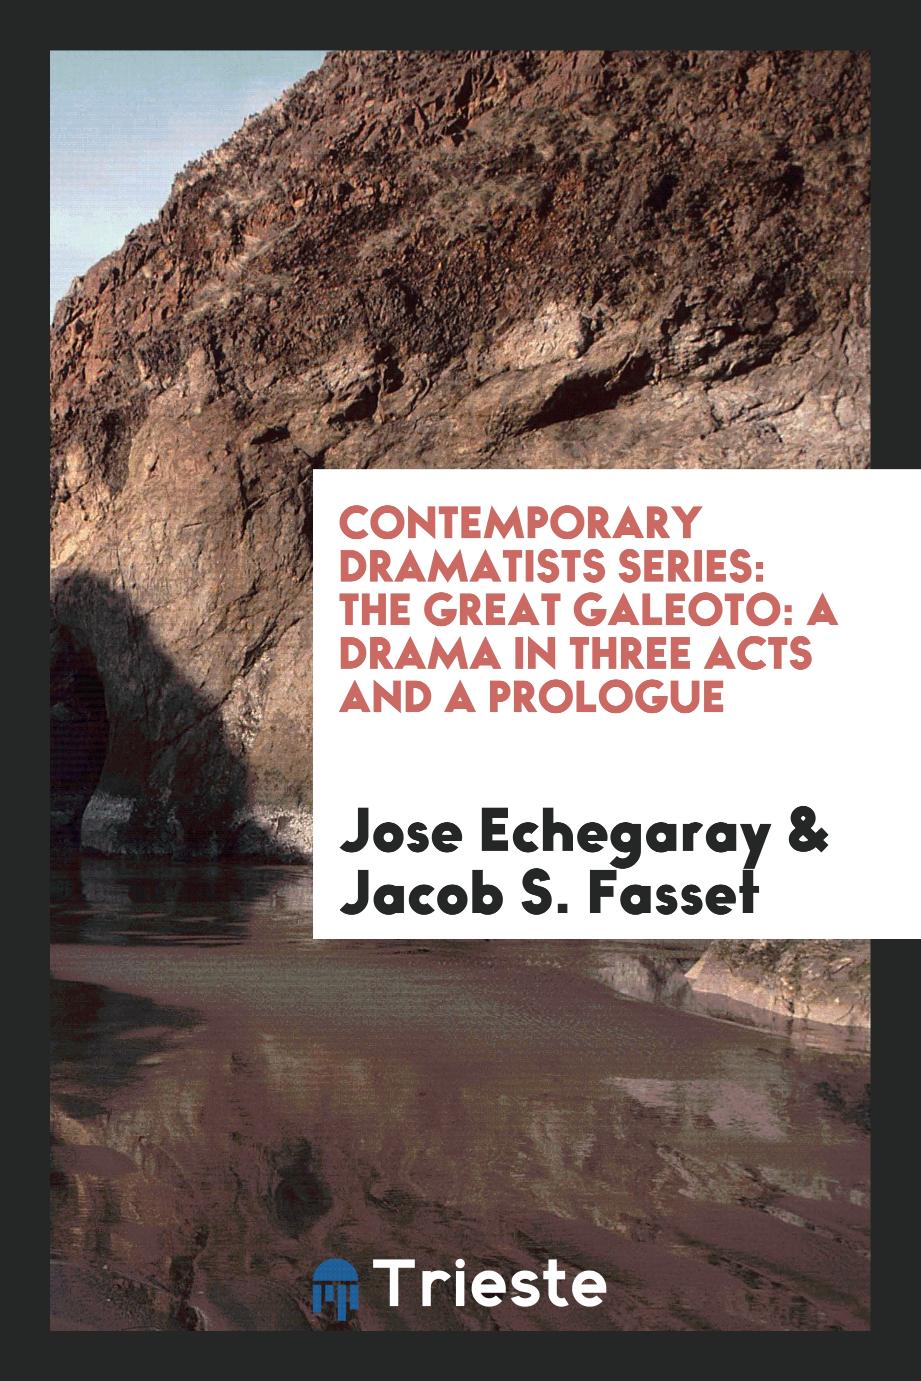 Contemporary Dramatists Series: The Great Galeoto: A Drama in Three Acts and a Prologue